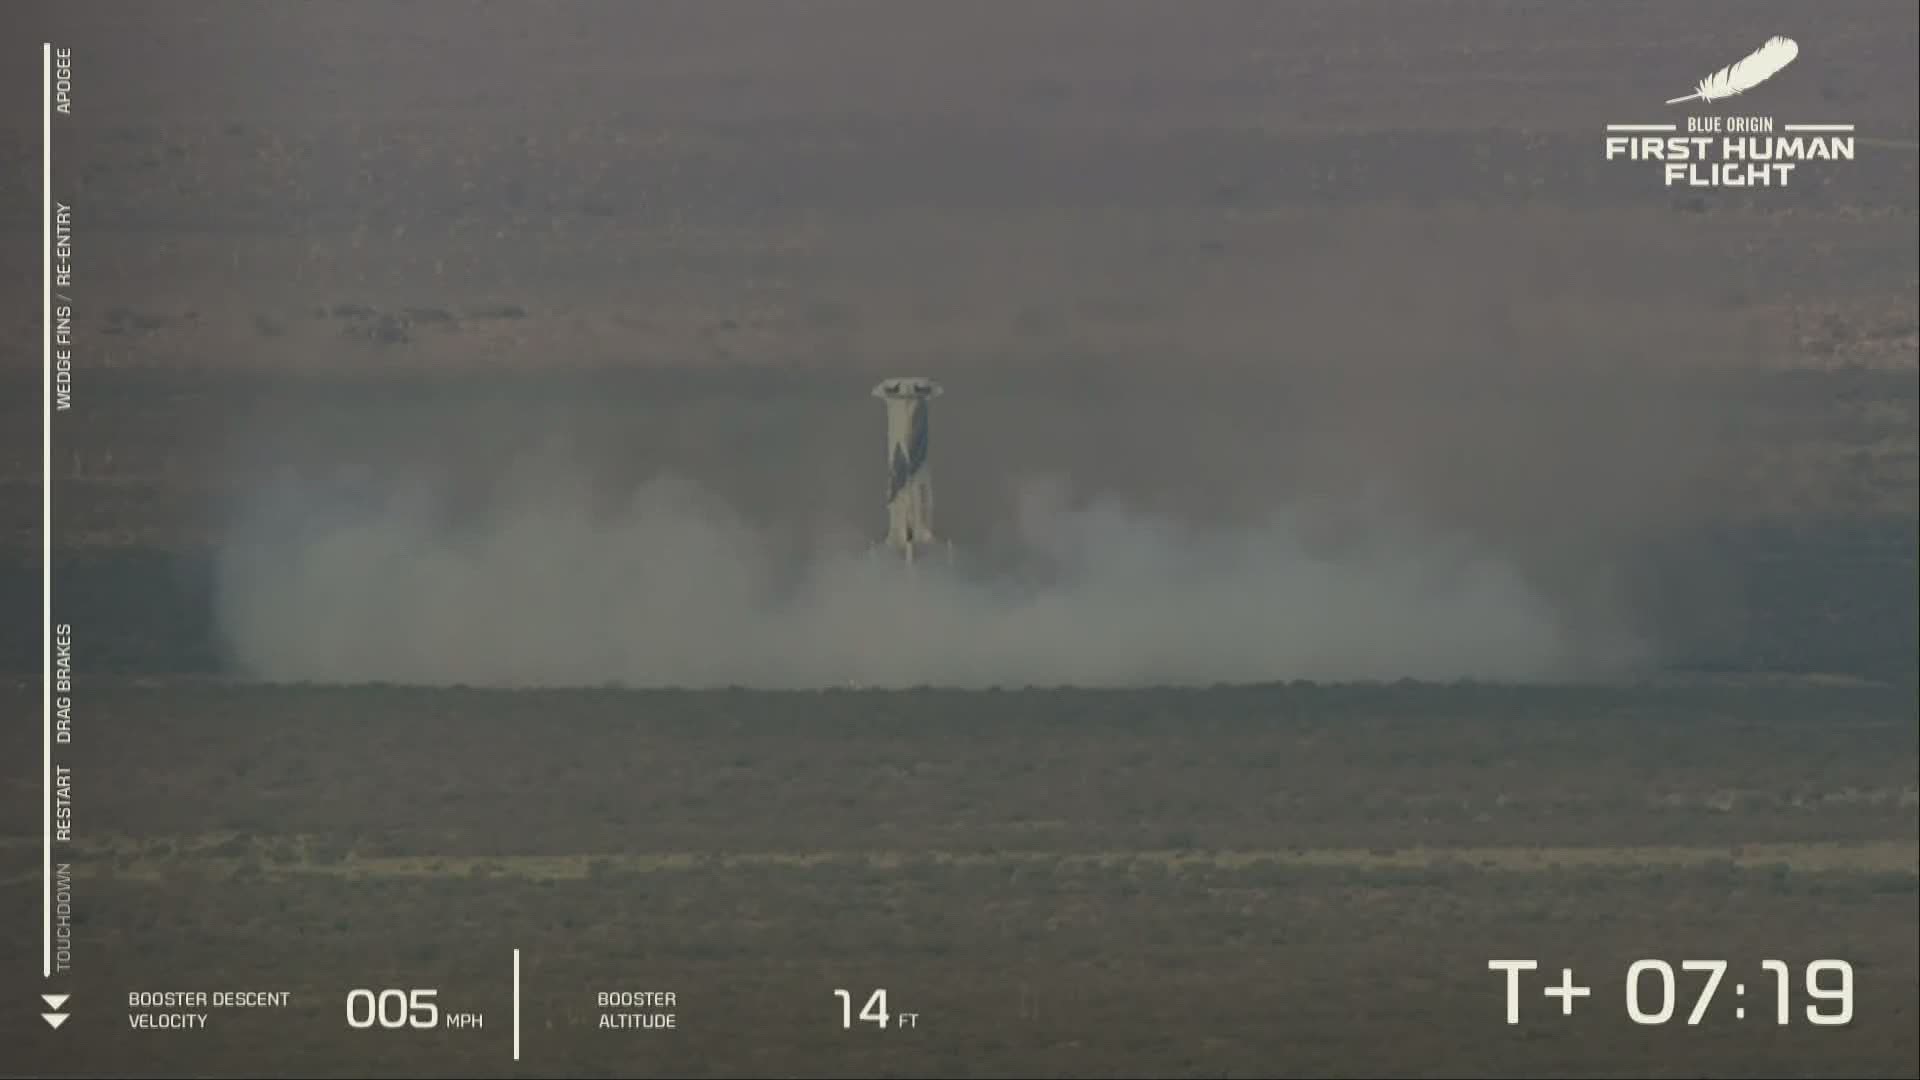 BOOSTER TOUCHDOWN! After launching Jeff Bezos, his brother and two others into space, New Shepard's booster makes a safe landing back to the ground.